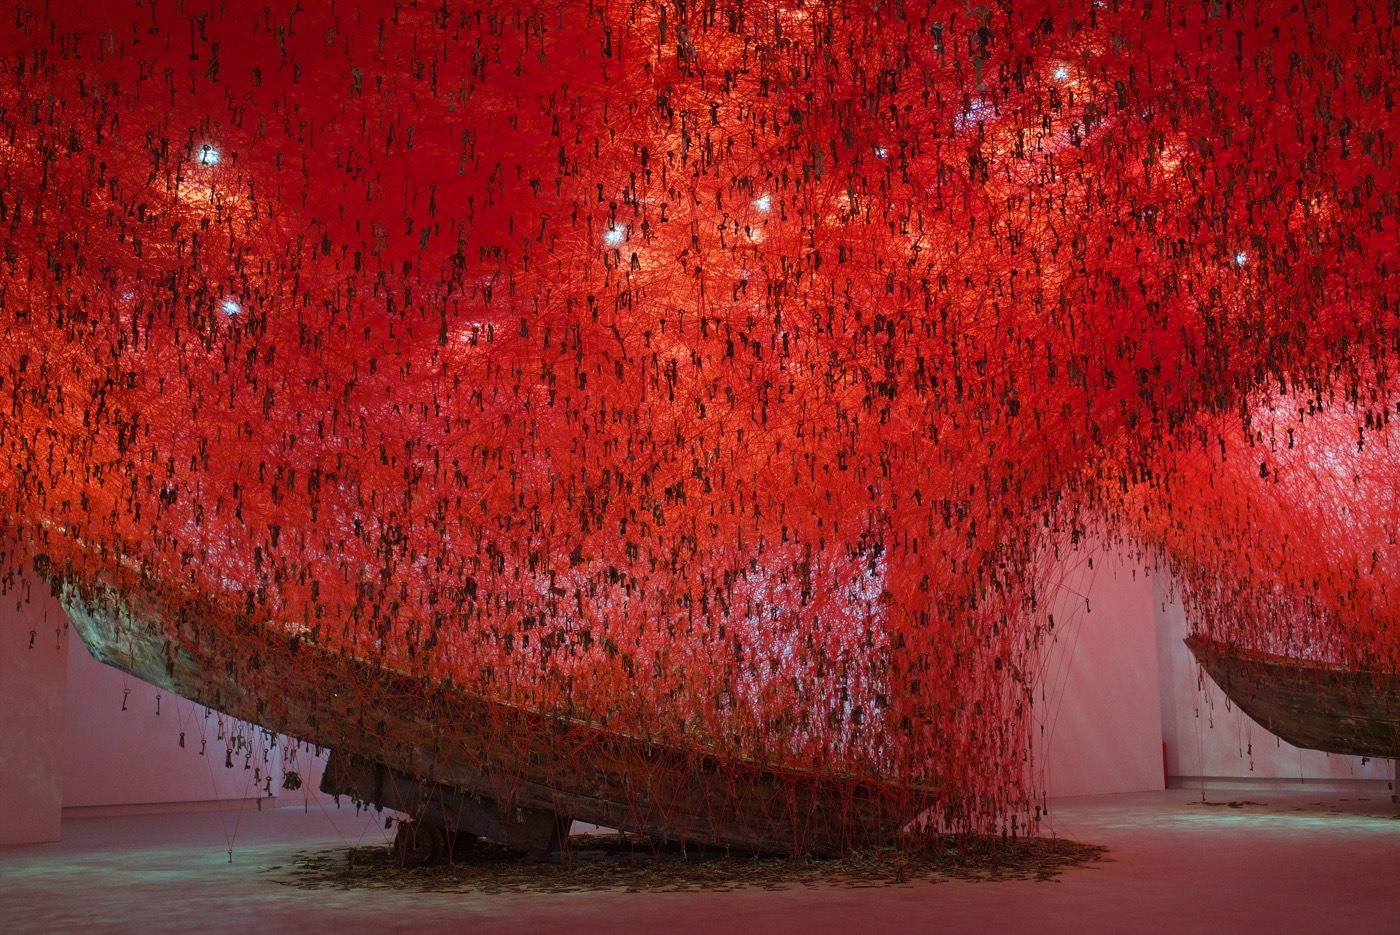 "The Key in the Hand", 2015, Old keys, old wooden boats, red wool, Venice, Italy, photo by Sunhi Mang